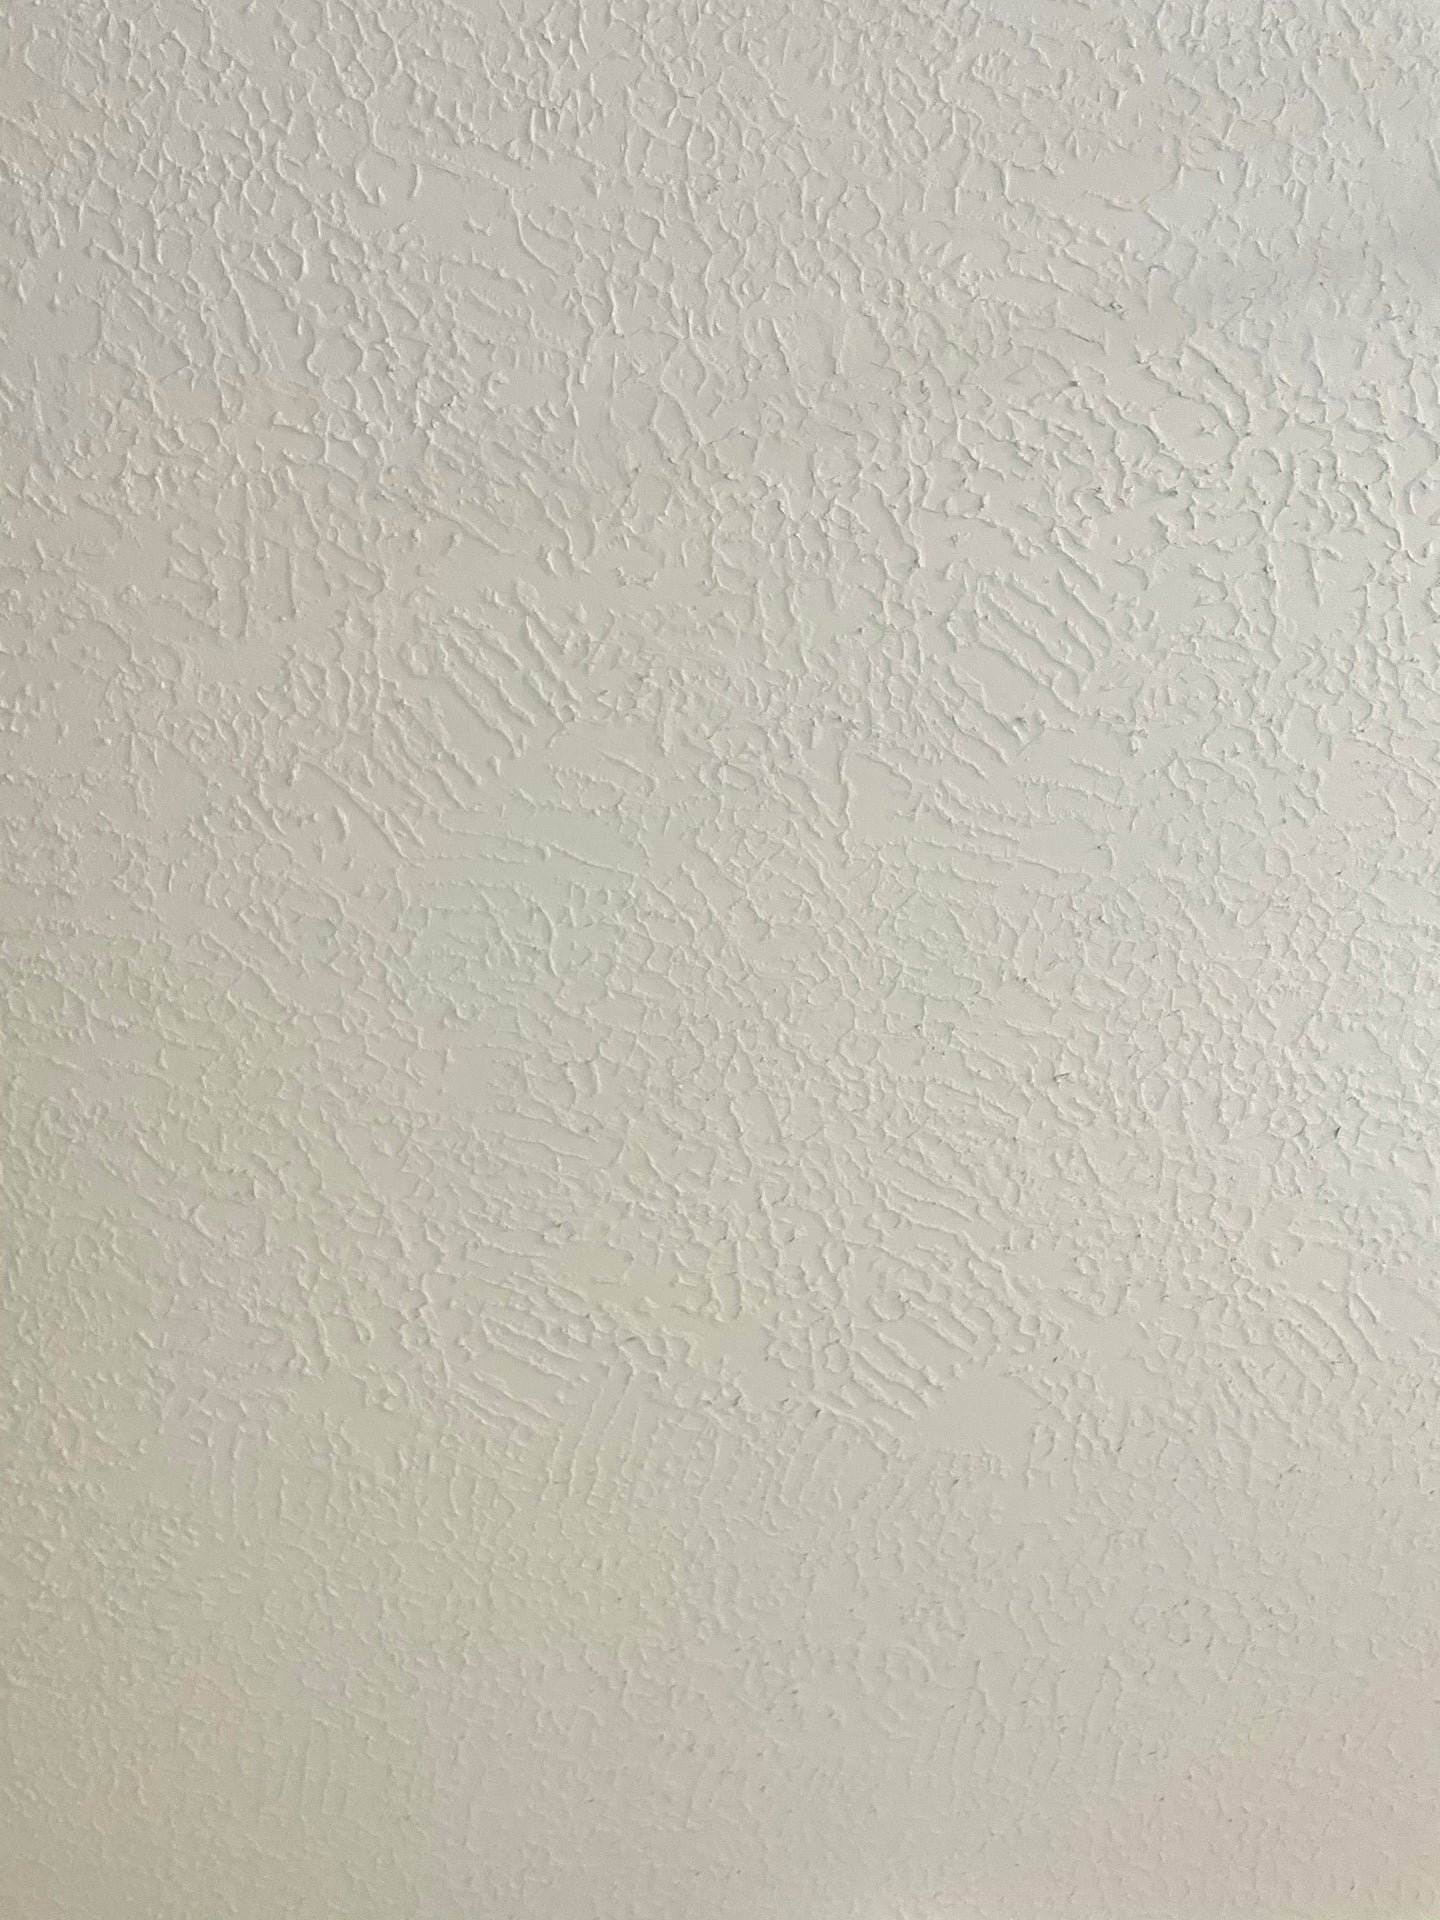 Drywall Ceiling Texture And Matching